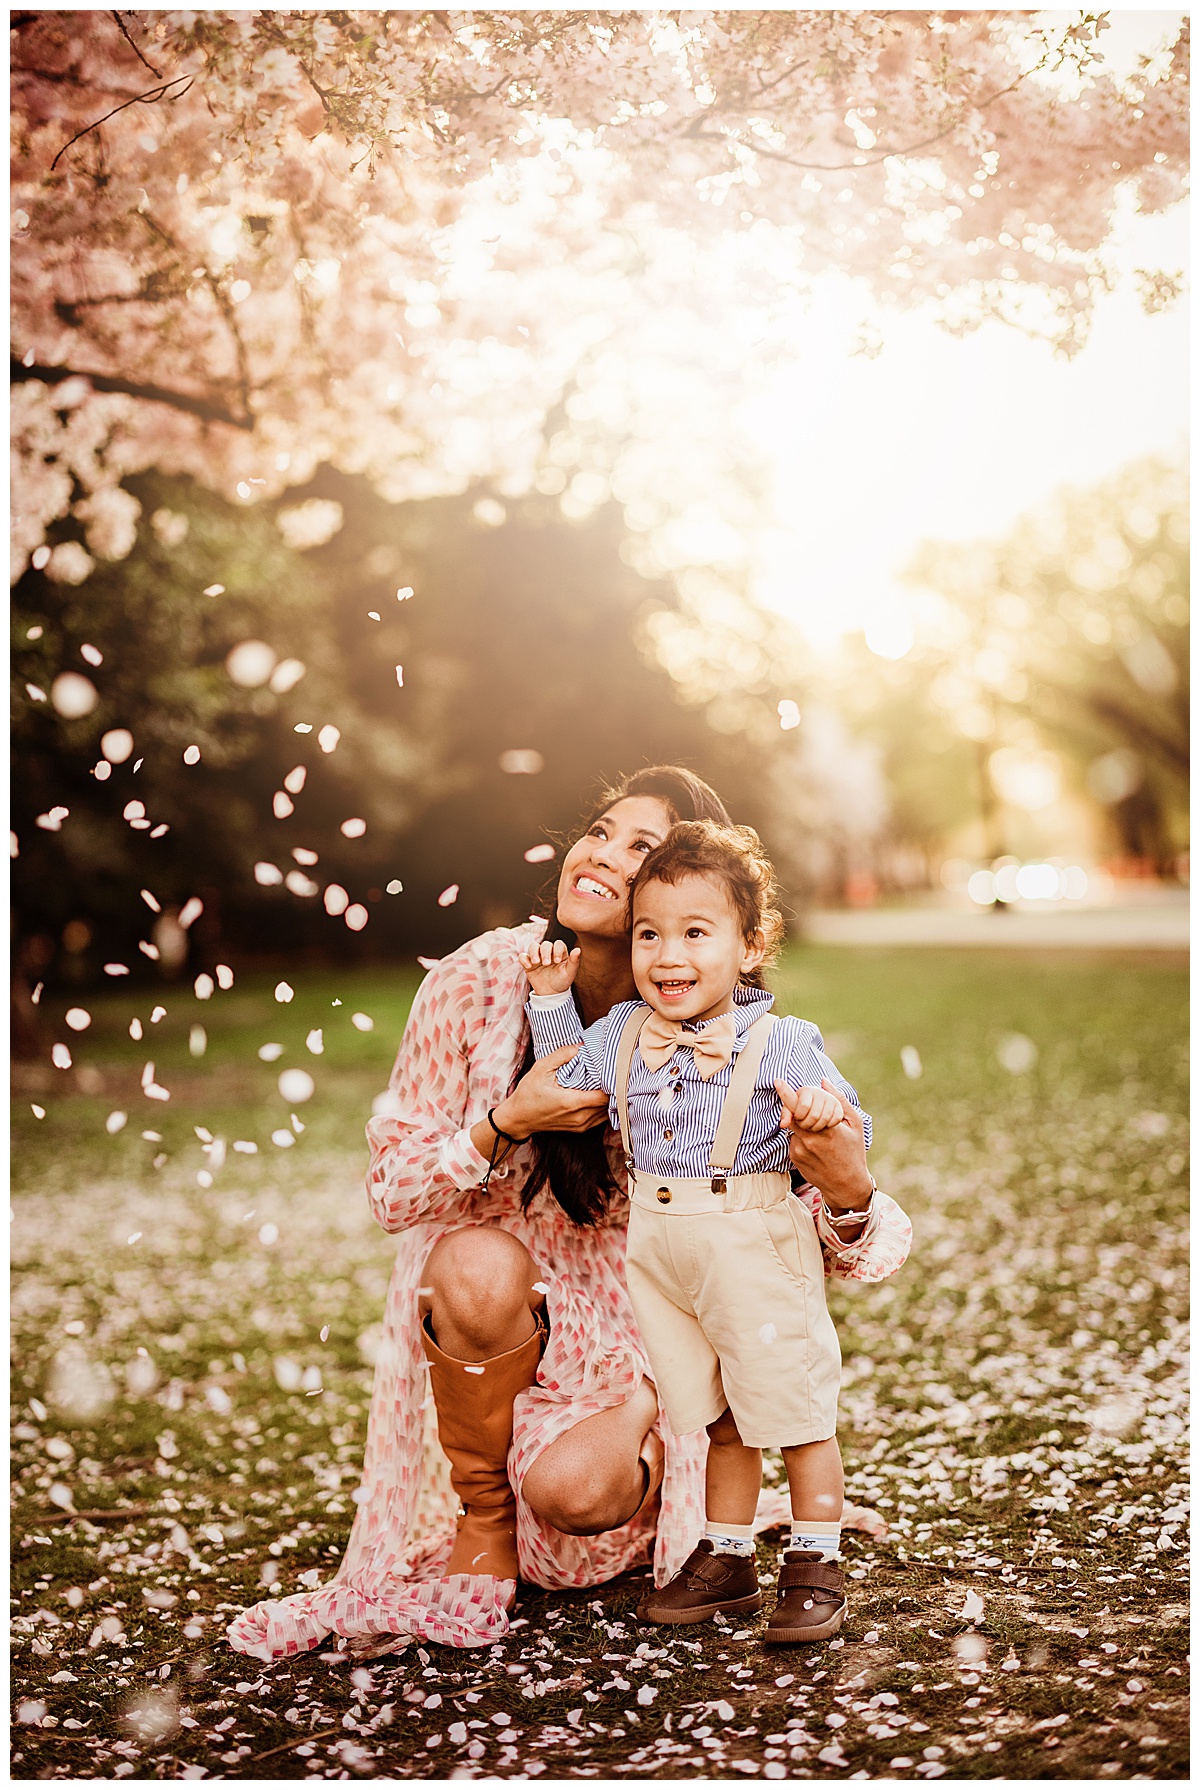 Mom and son play together in flower petals during their Washington, DC, Cherry Blossom photos